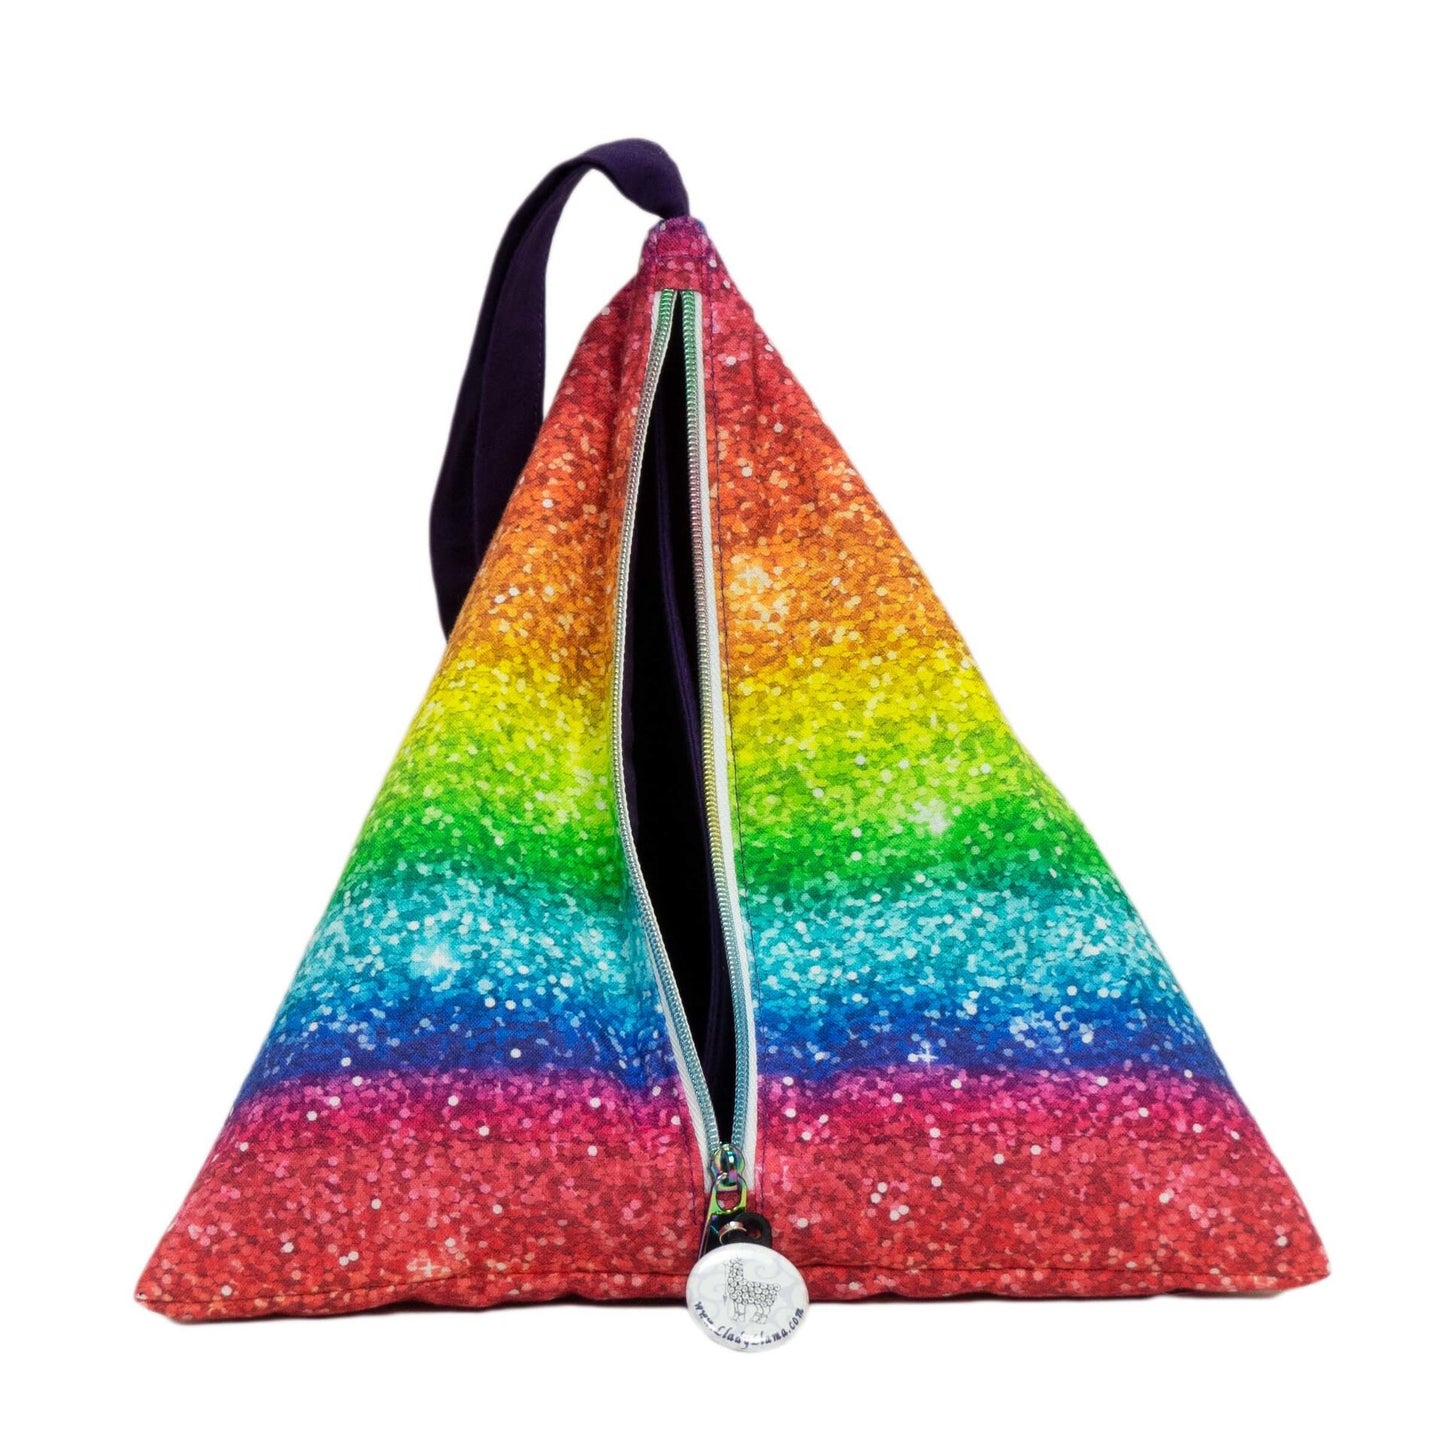 Pride Glitter - Llexical Divided Sock Pouch - Knitting, Crochet, Spinning Project Bag